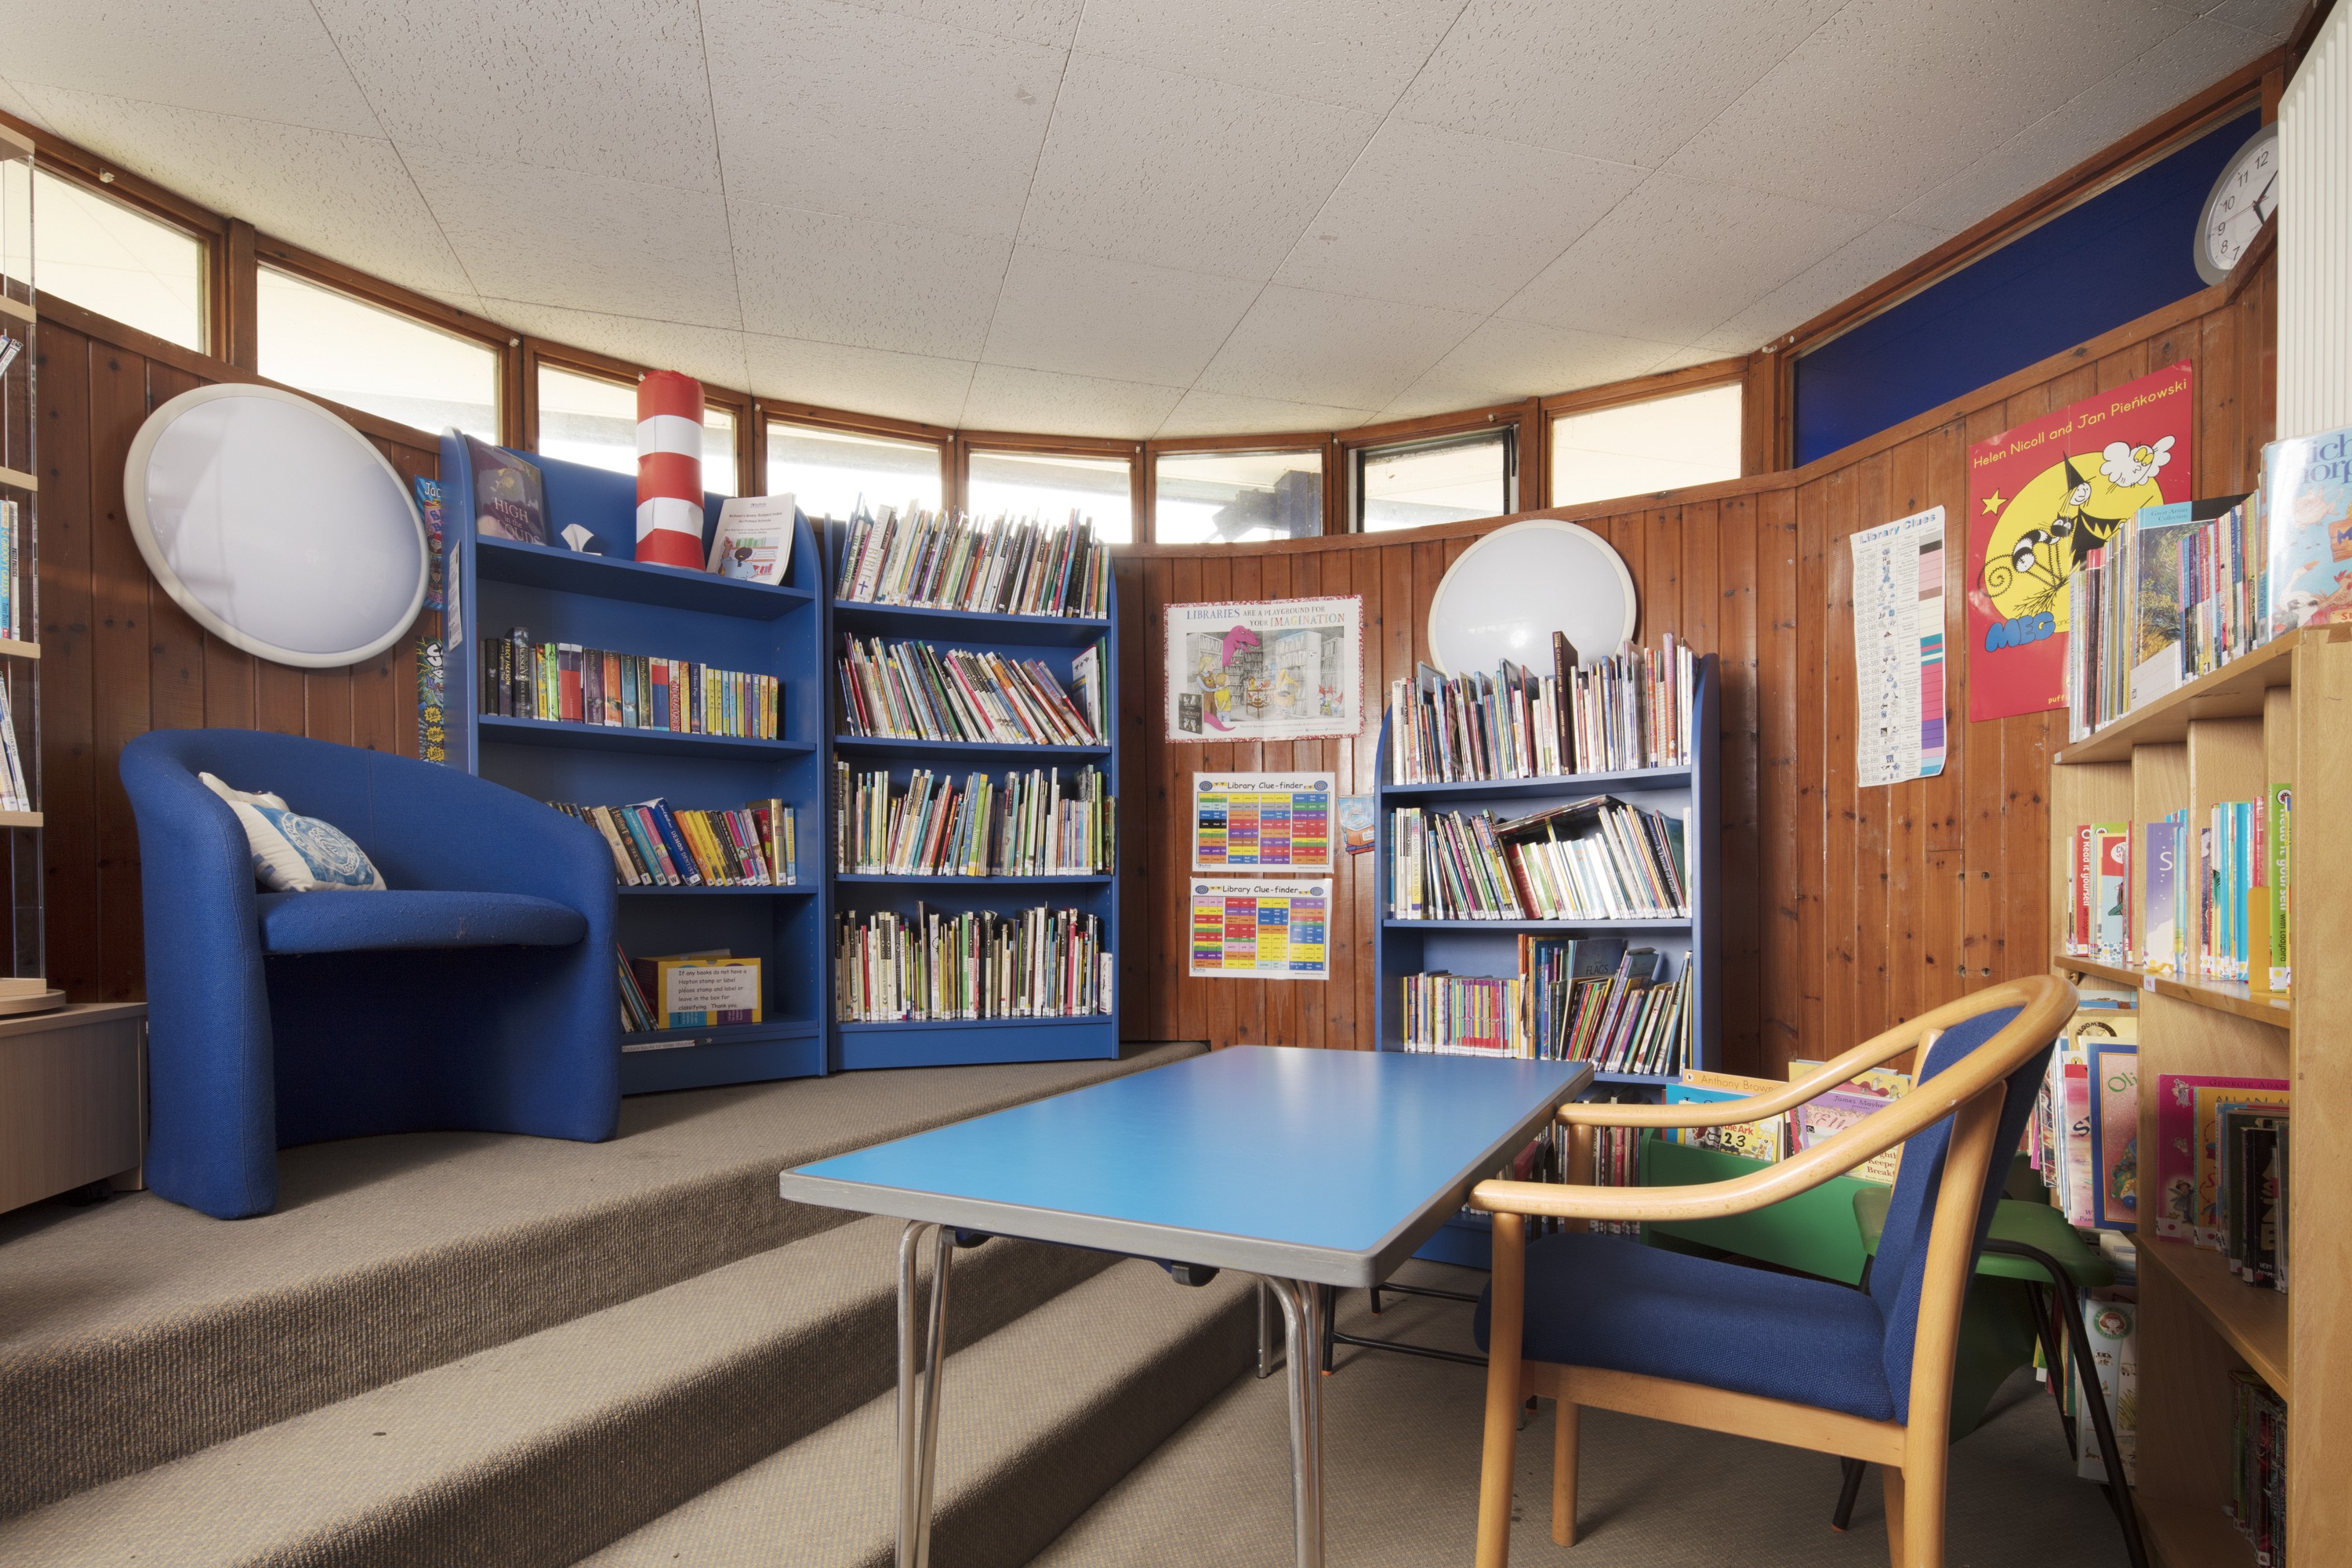 Photo of the interior of a school classroom with bright blue bookshelves and seats. The walls are wood panelled with small windows at the top.